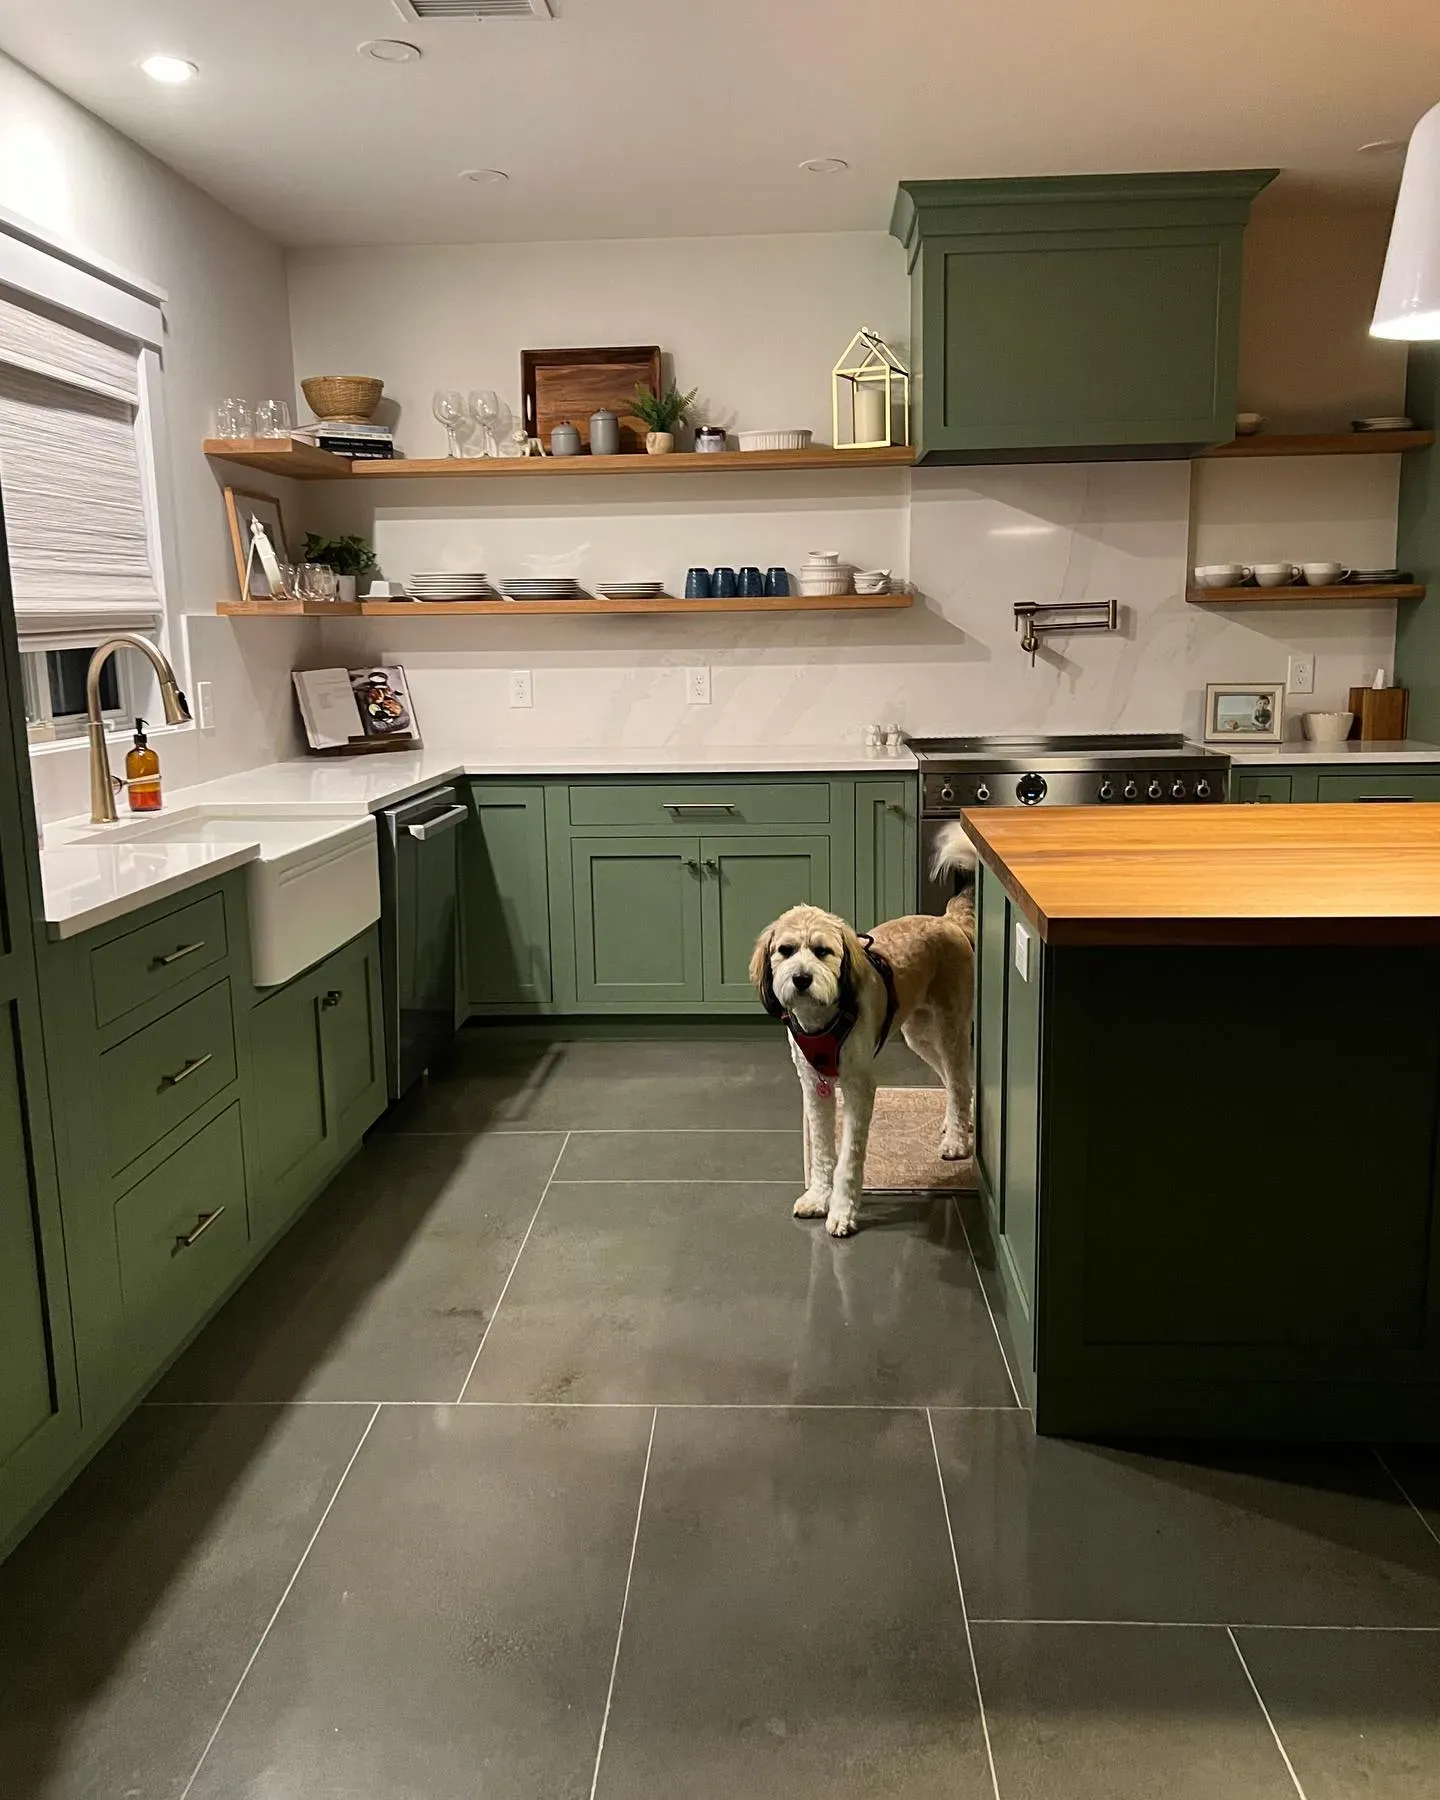 Benjamin Moore High Park kitchen cabinets color review